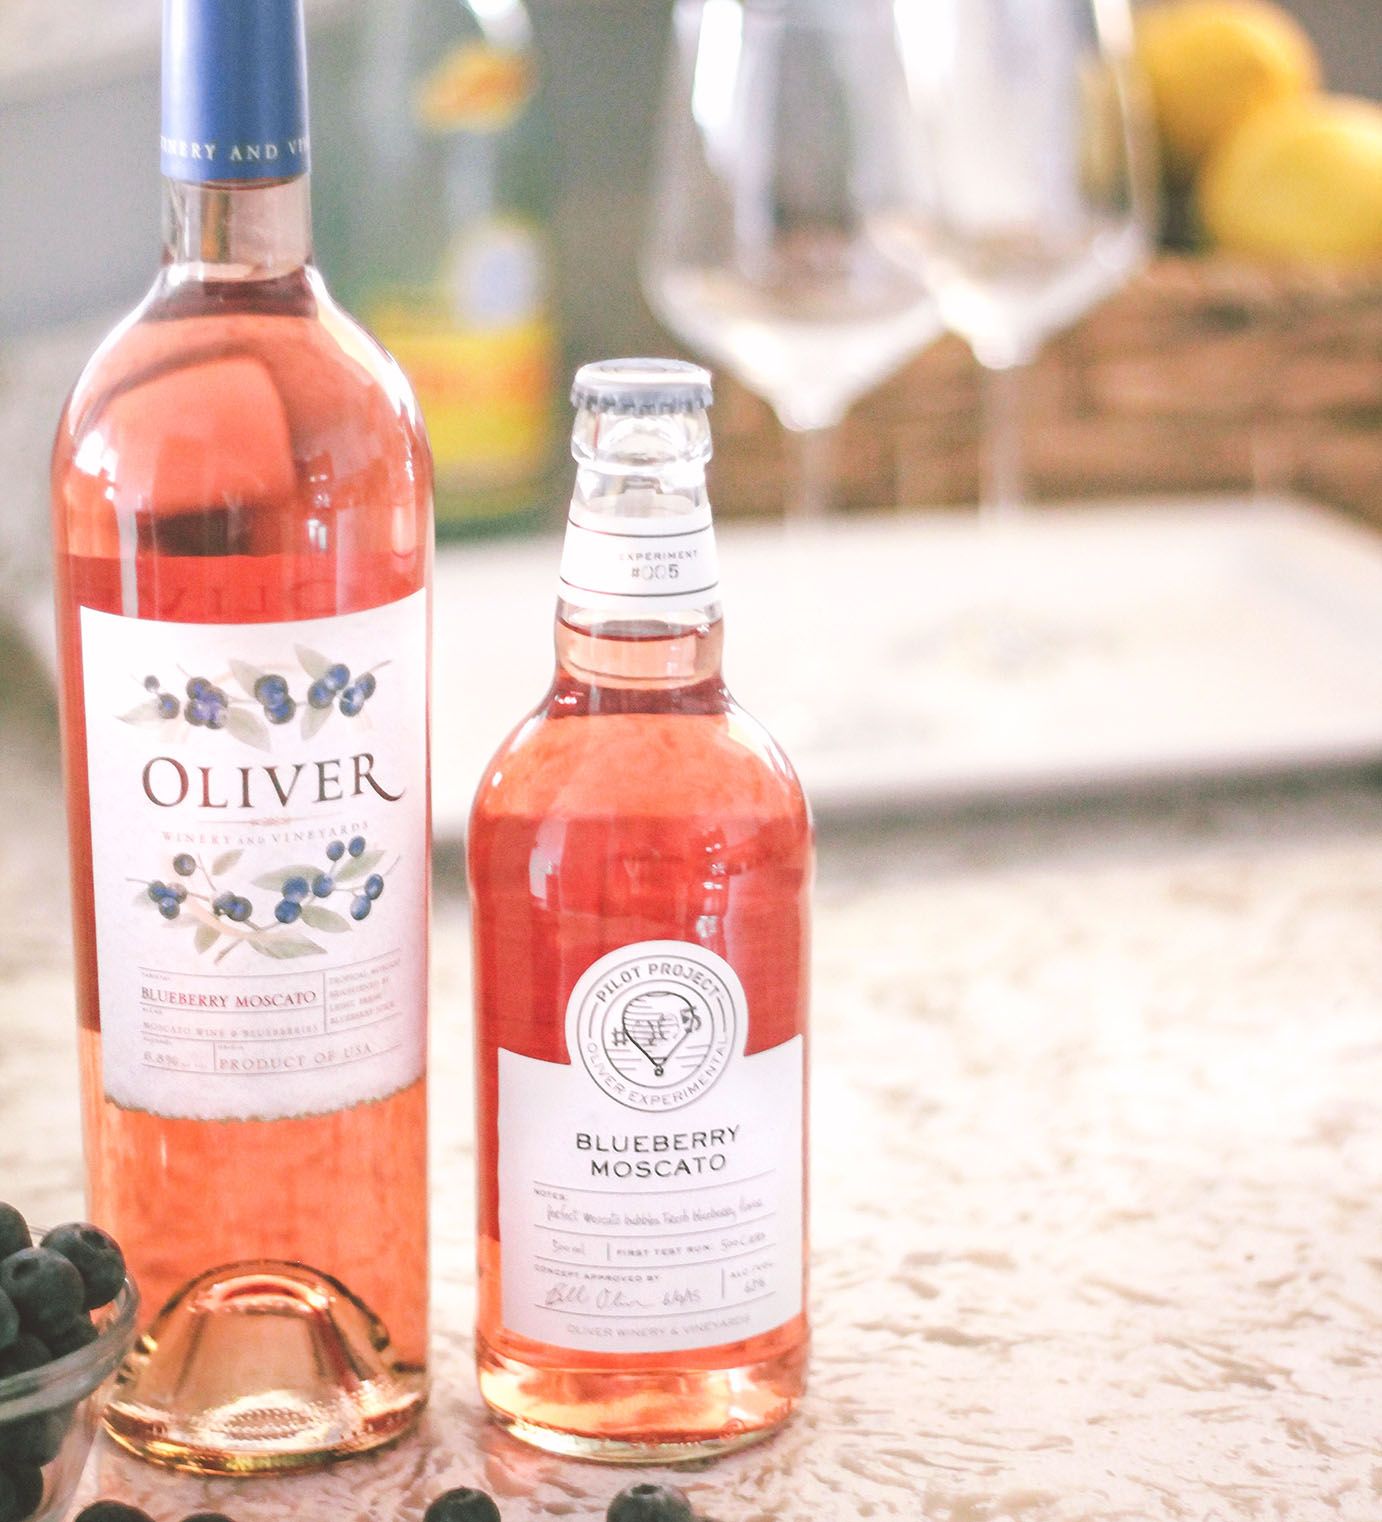 Oliver Winery Created A Blueberry Moscato Wine New Wines Spring 2019